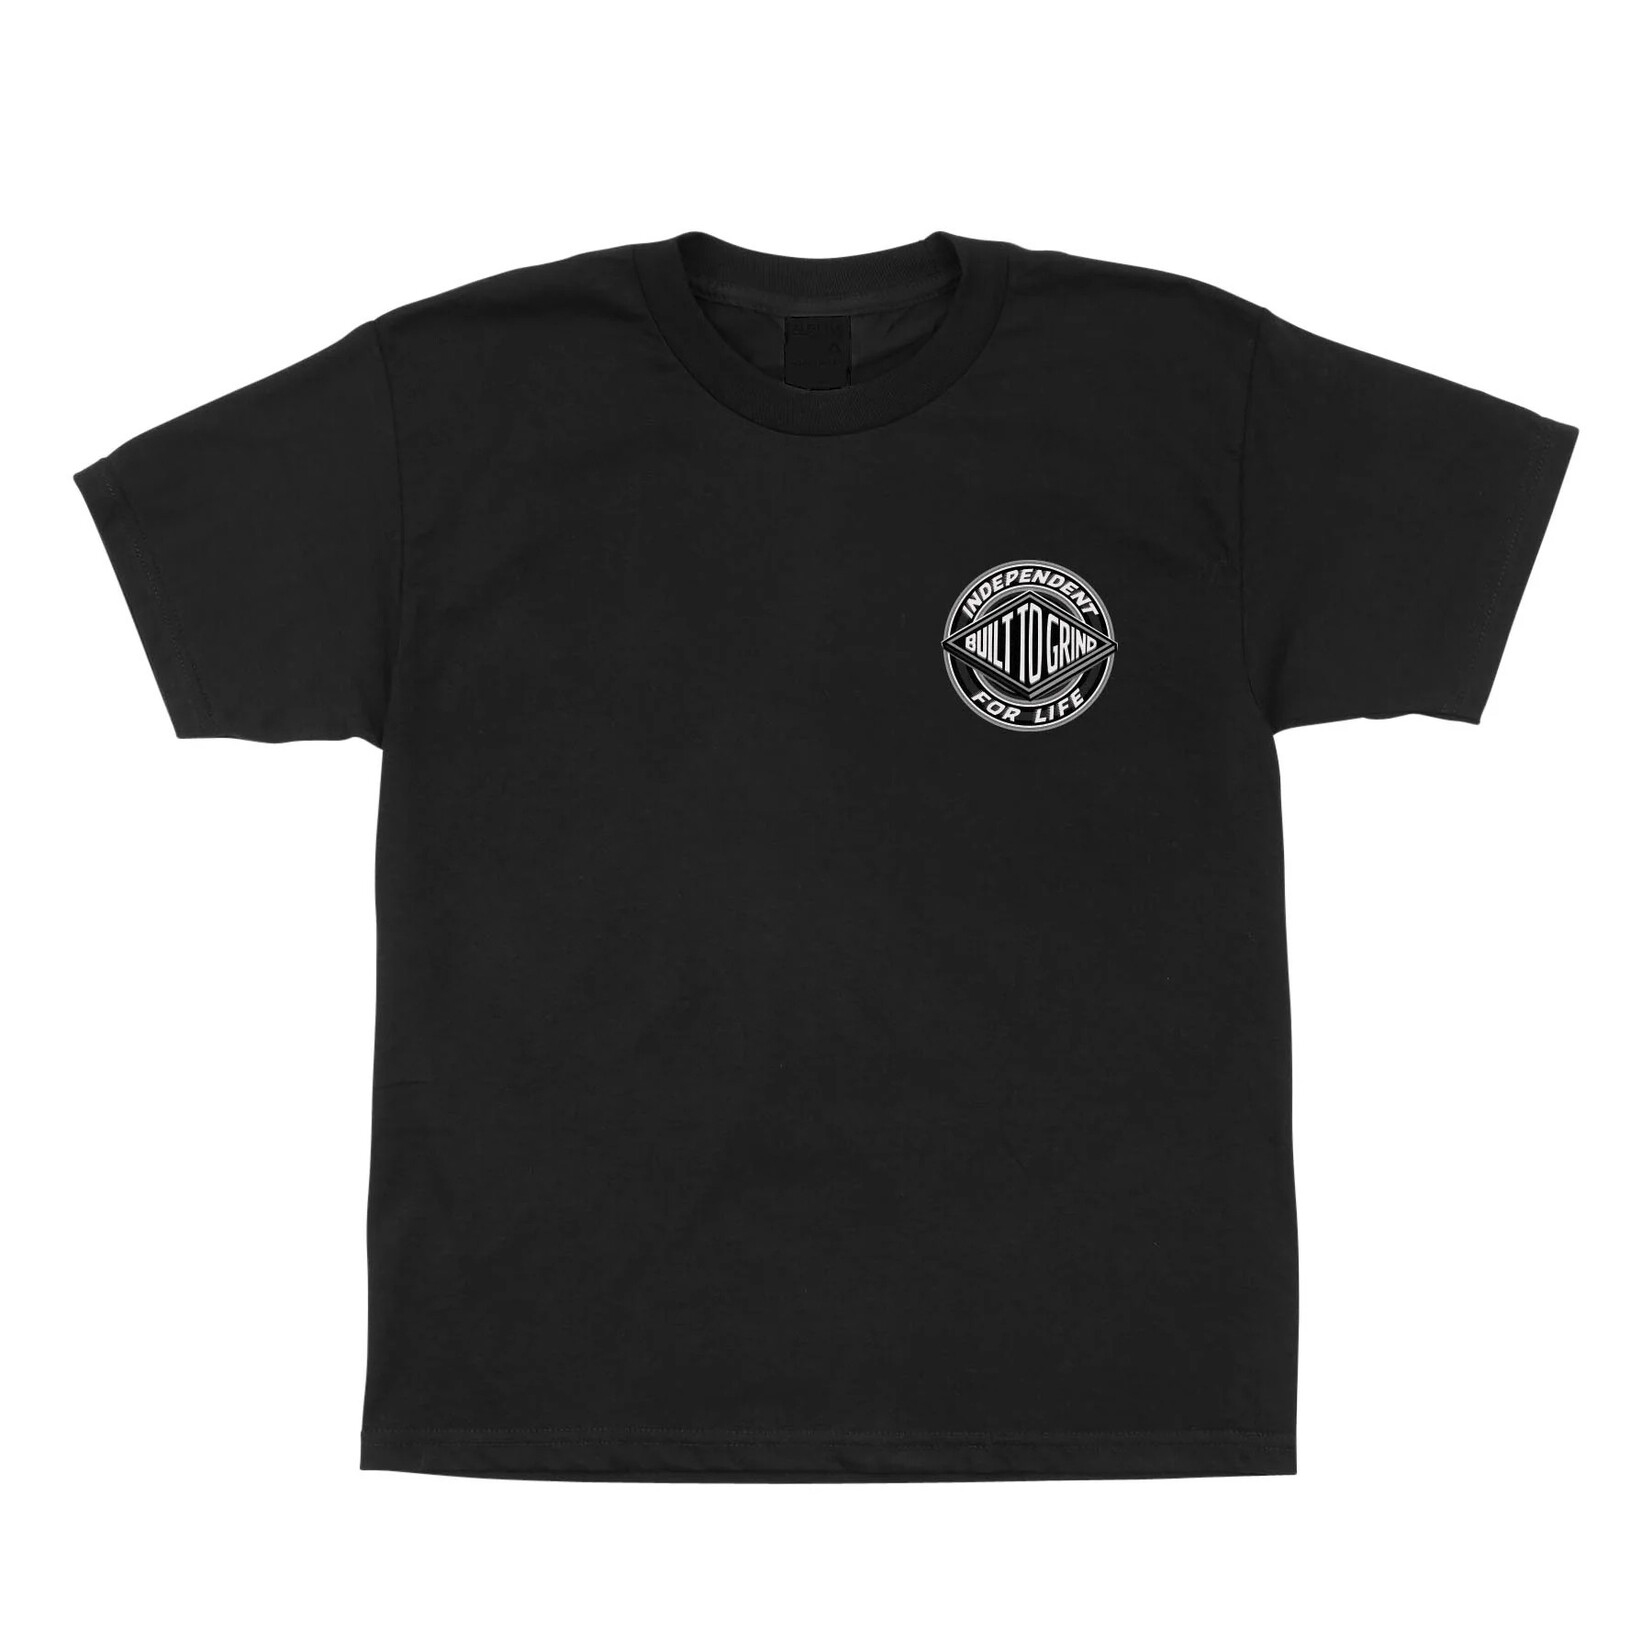 Independent Independent For Life Clutch Youth S/S T-Shirt - Black - S